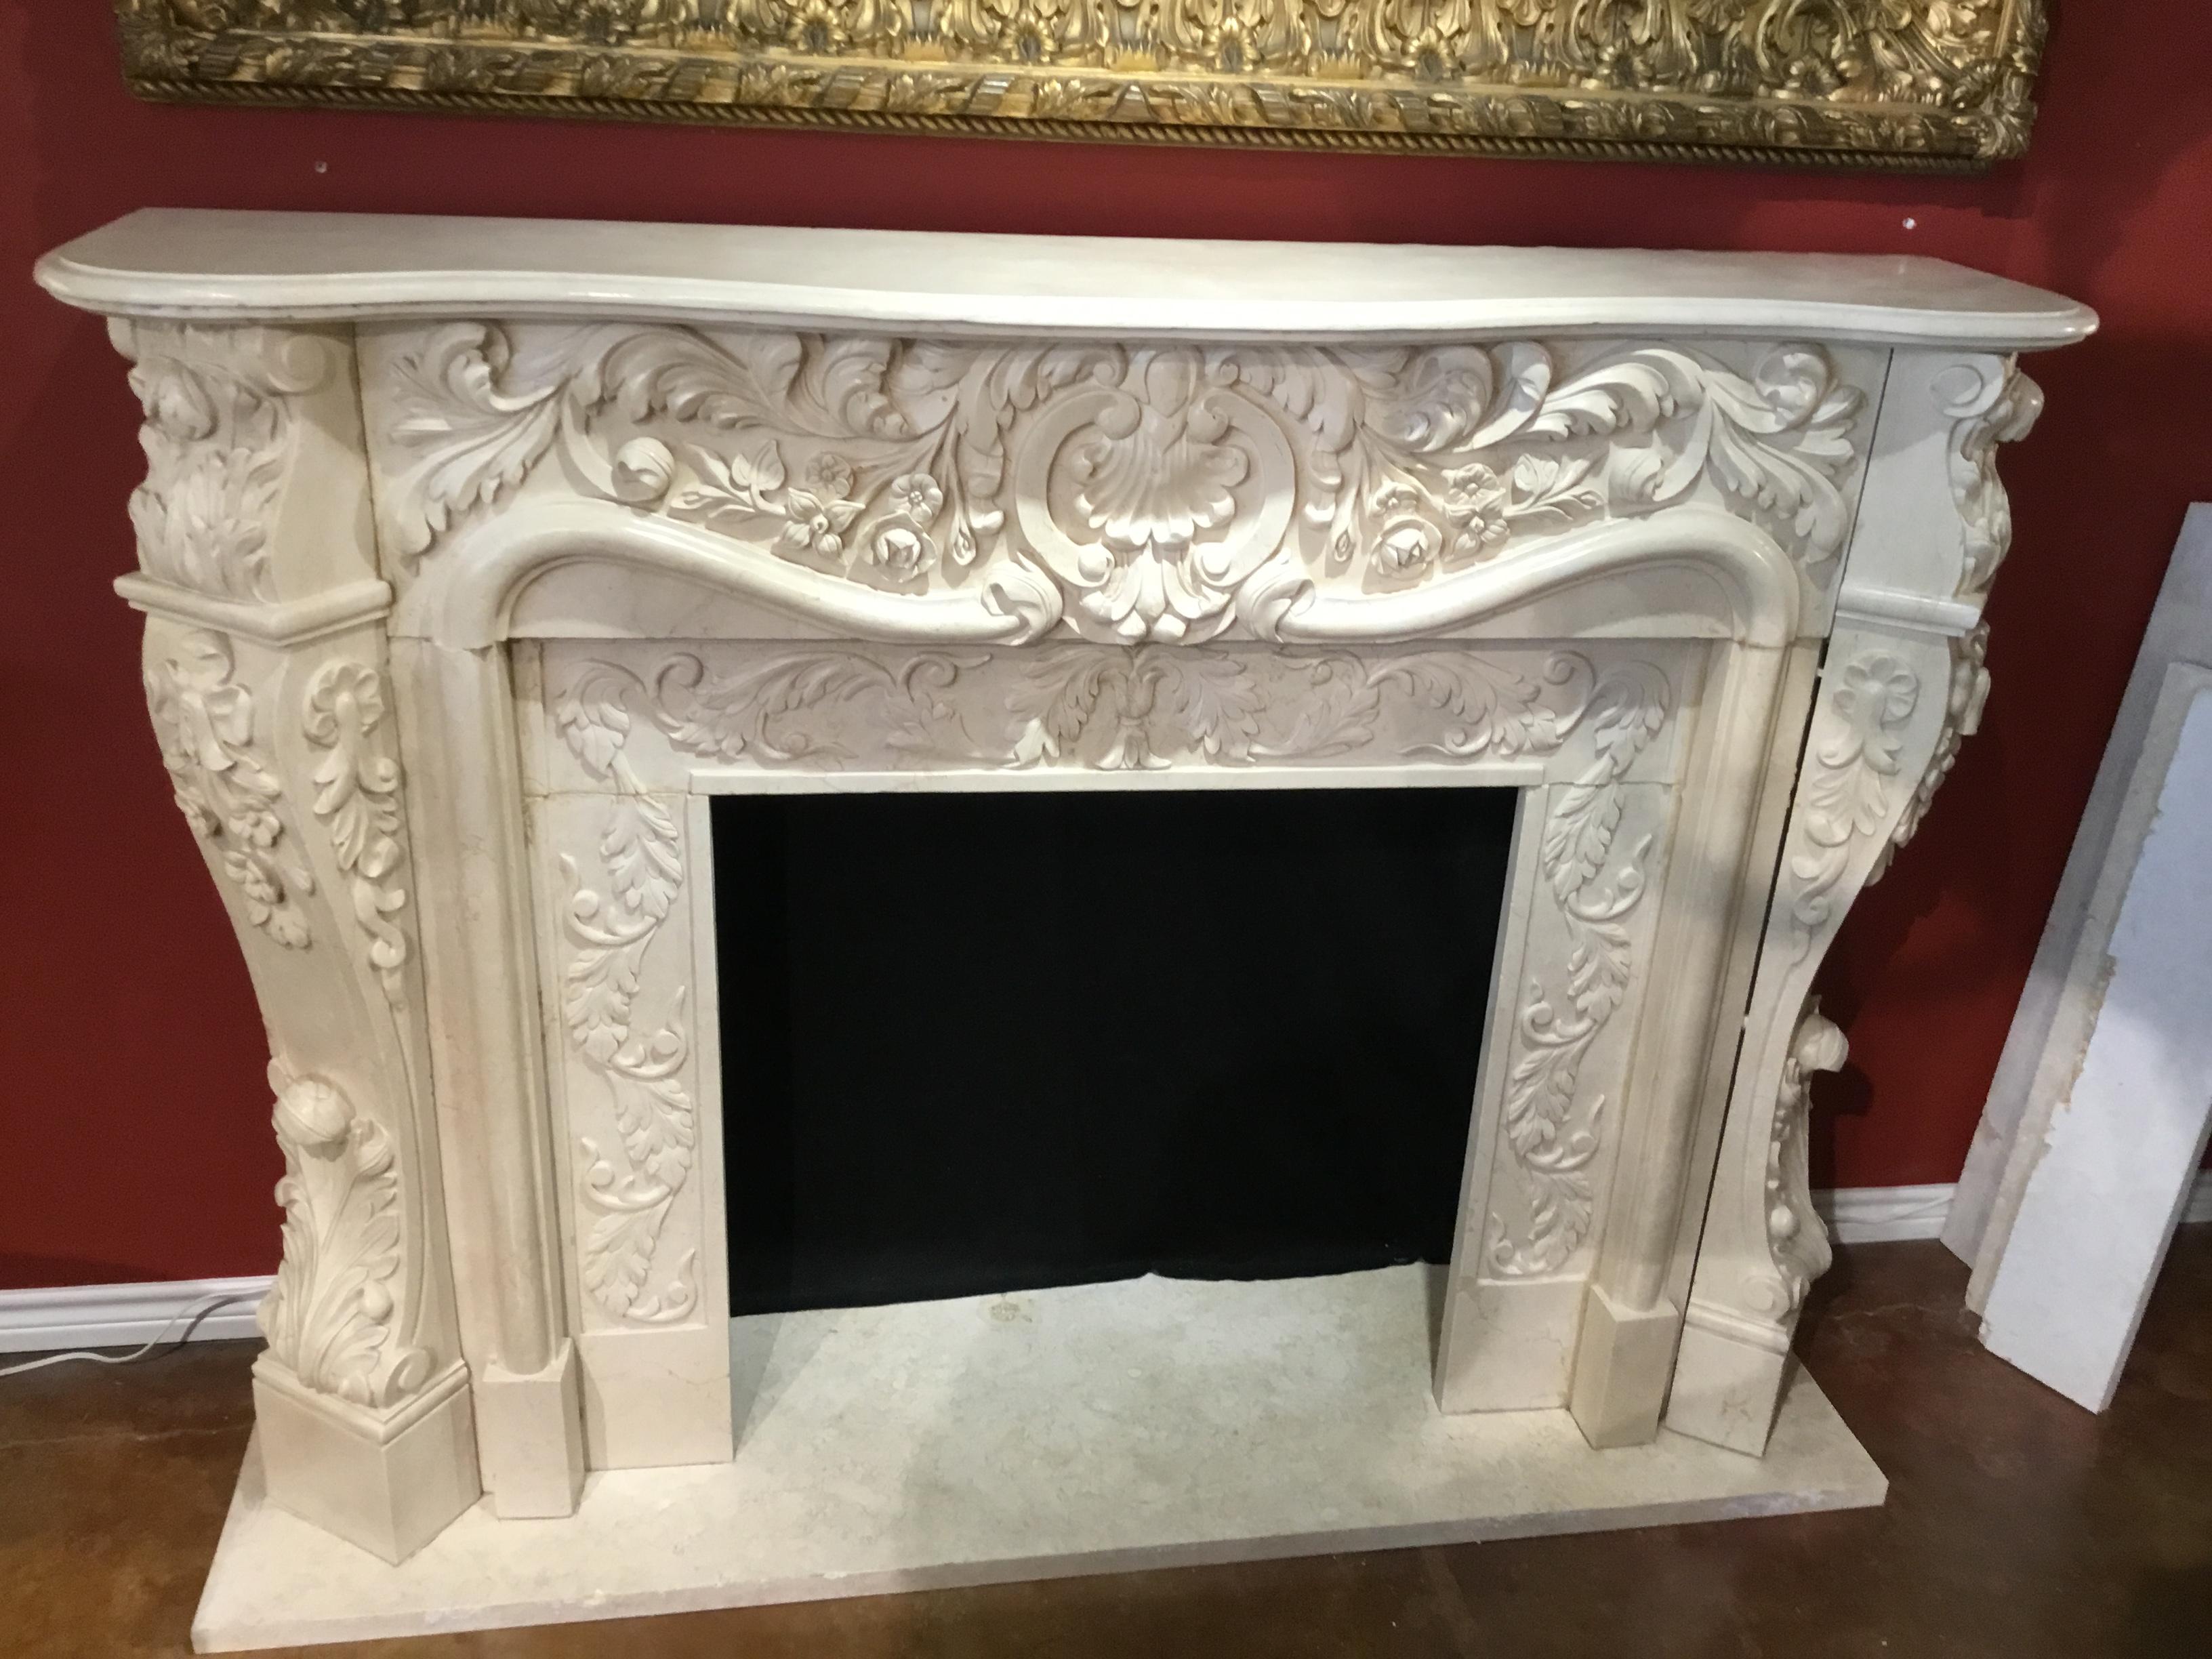 Contemporary Large French Style Cream Marble Mantel, Hand Carved with Floral Designs